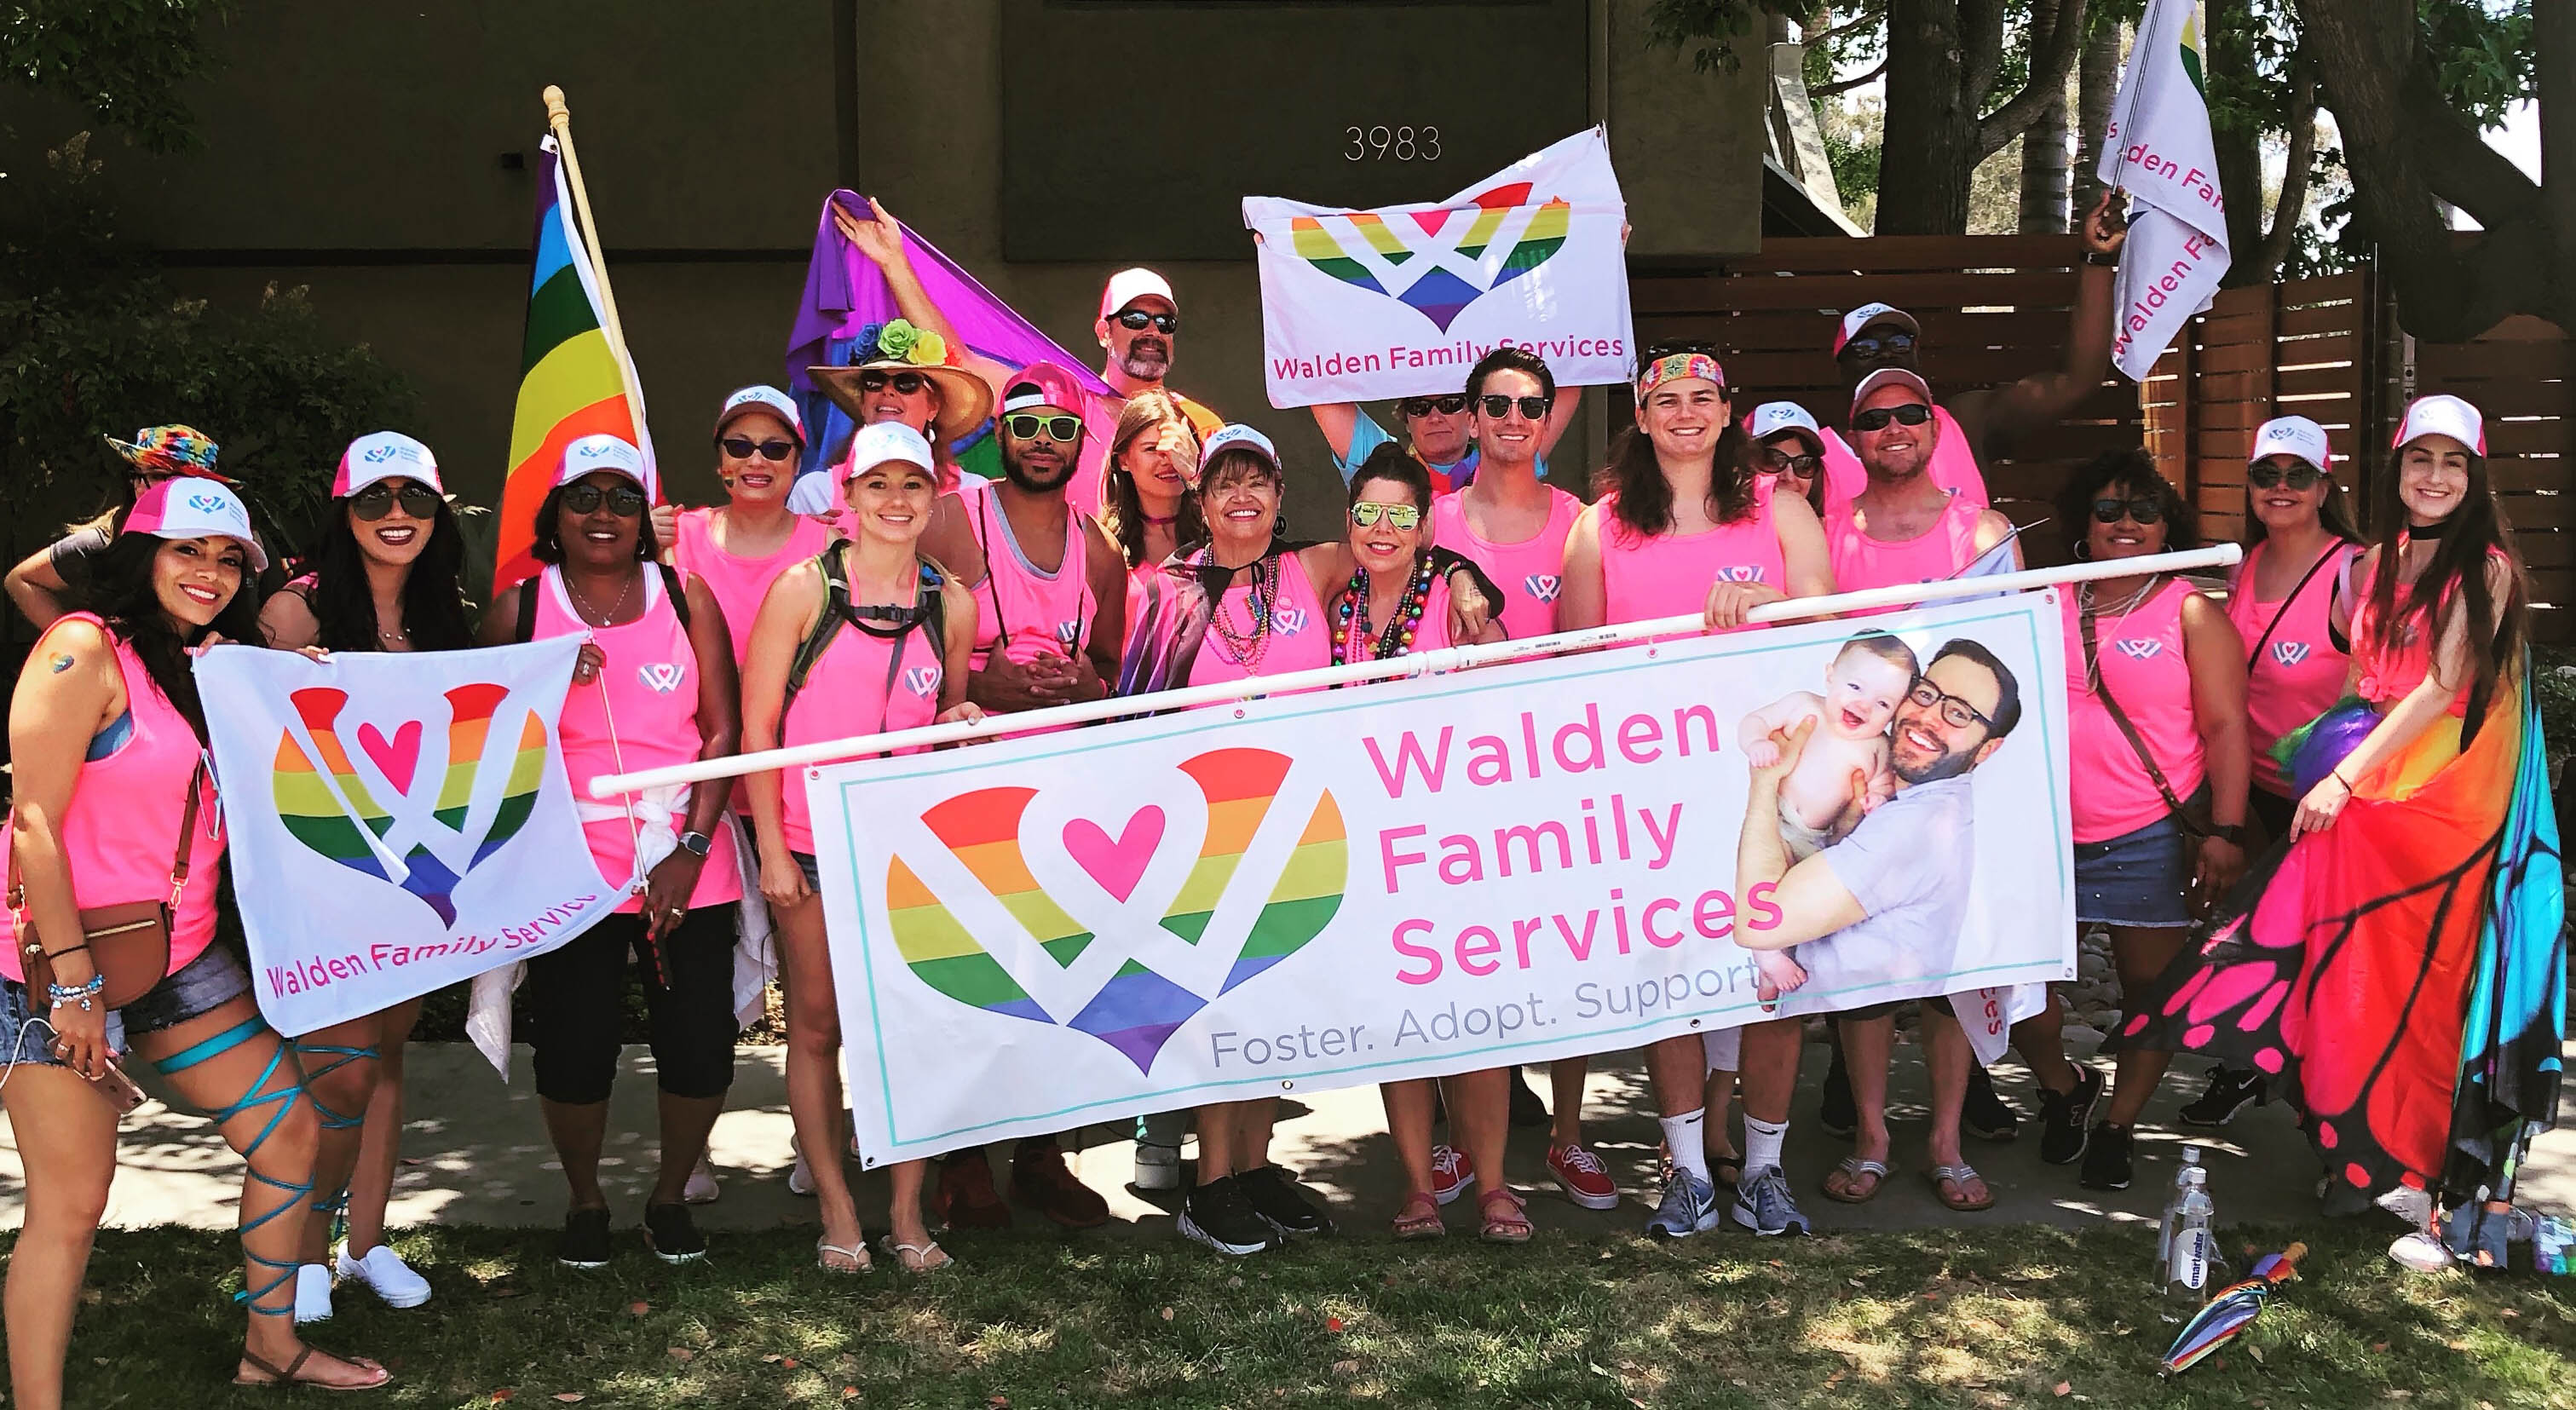 walden-family-services-recognized-for-innovation-in-inclusion-of-lgbtq-youth-by-hrc-foundation